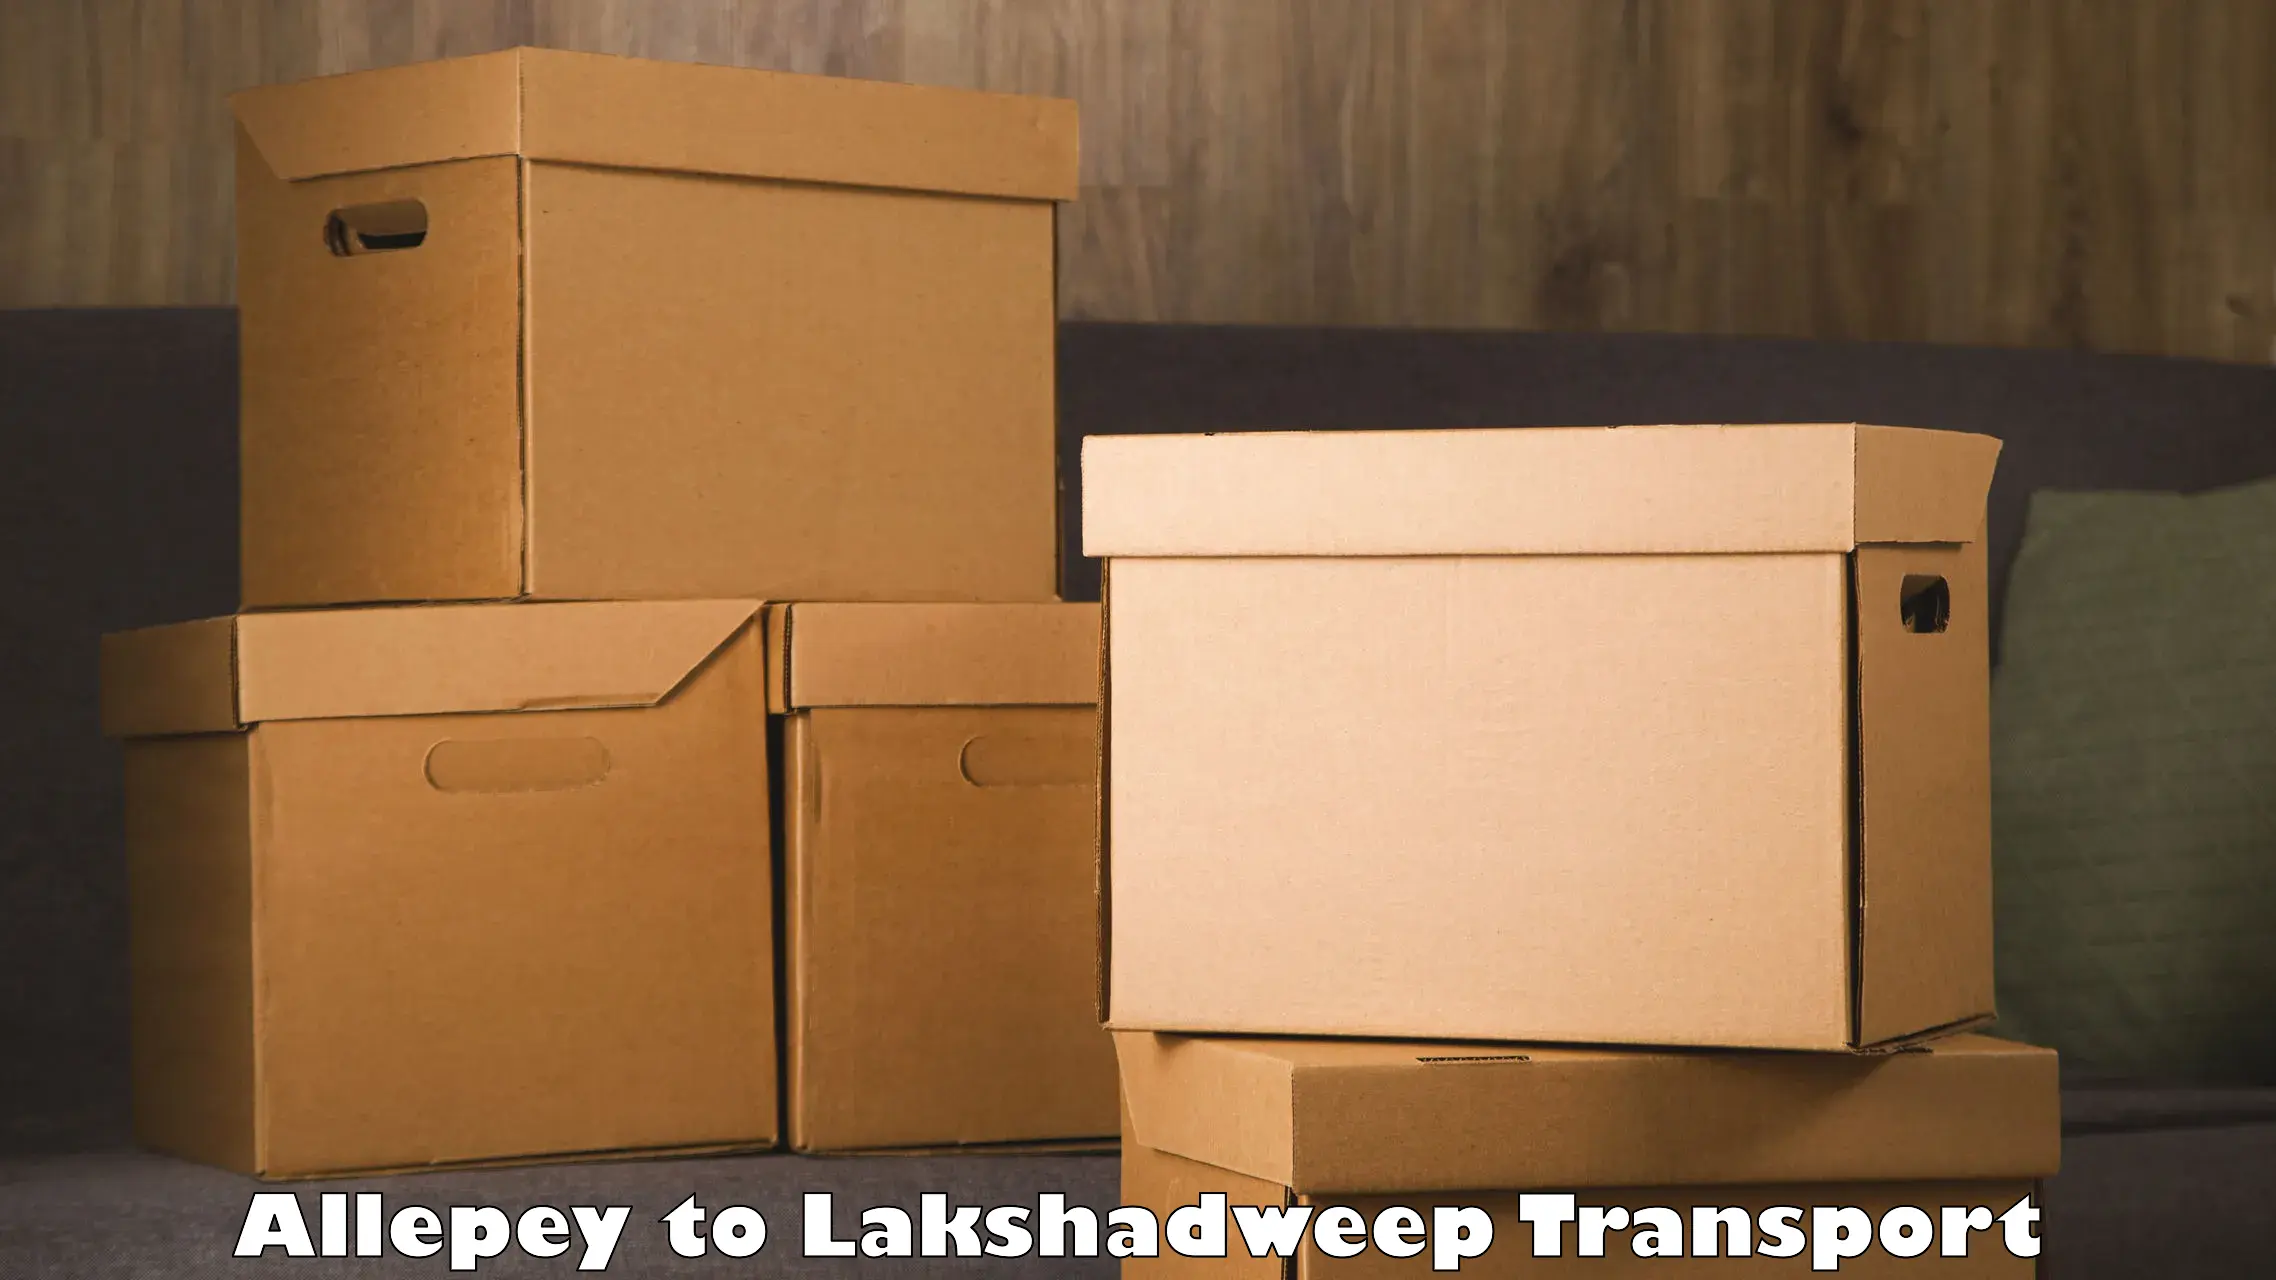 All India transport service Allepey to Lakshadweep